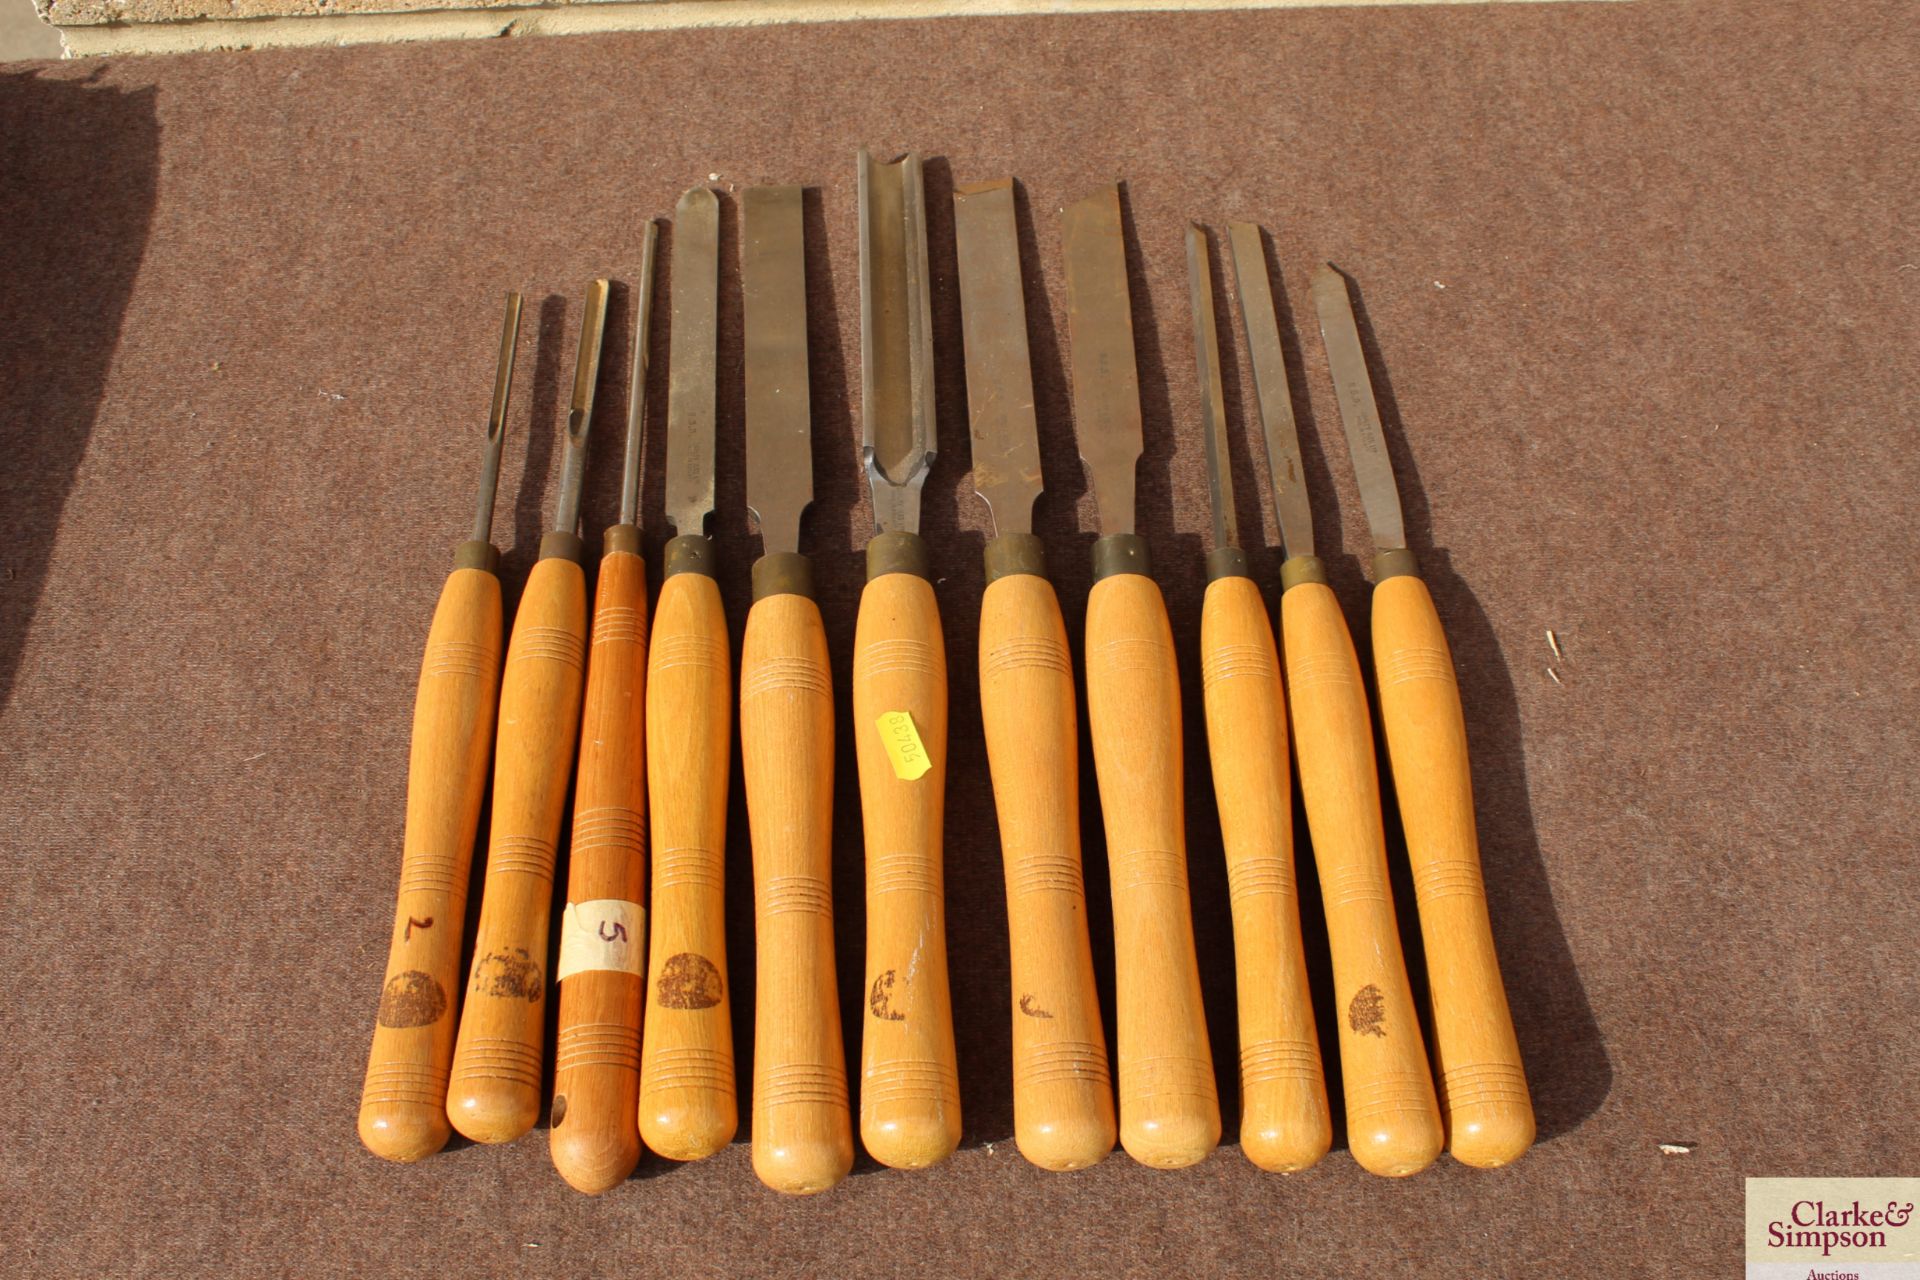 Tray containing a quantity of woodturning chisels.